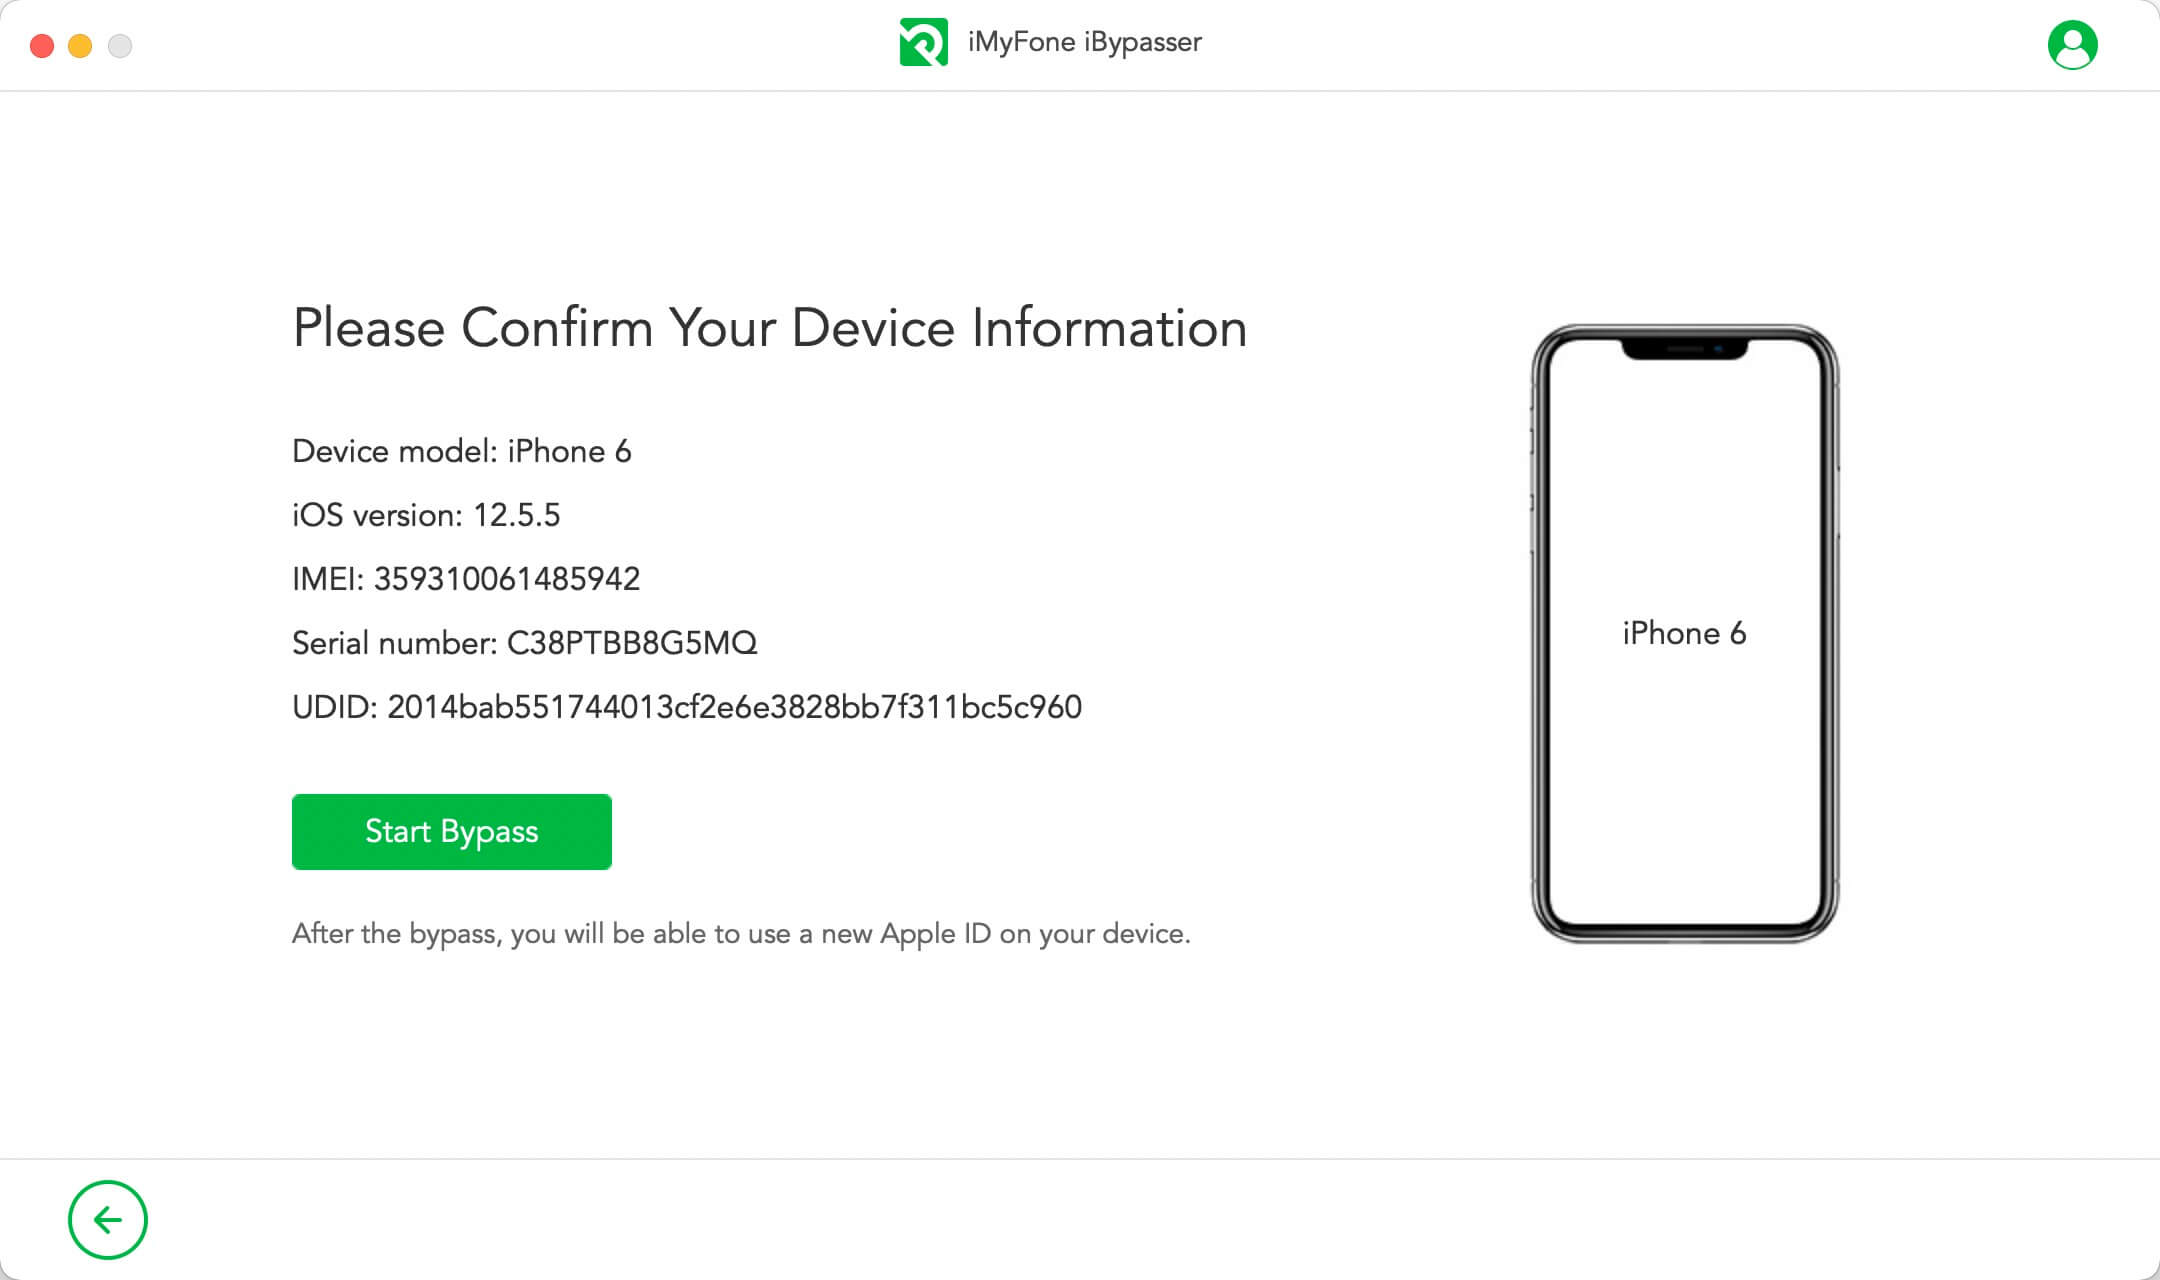 confirm your device information